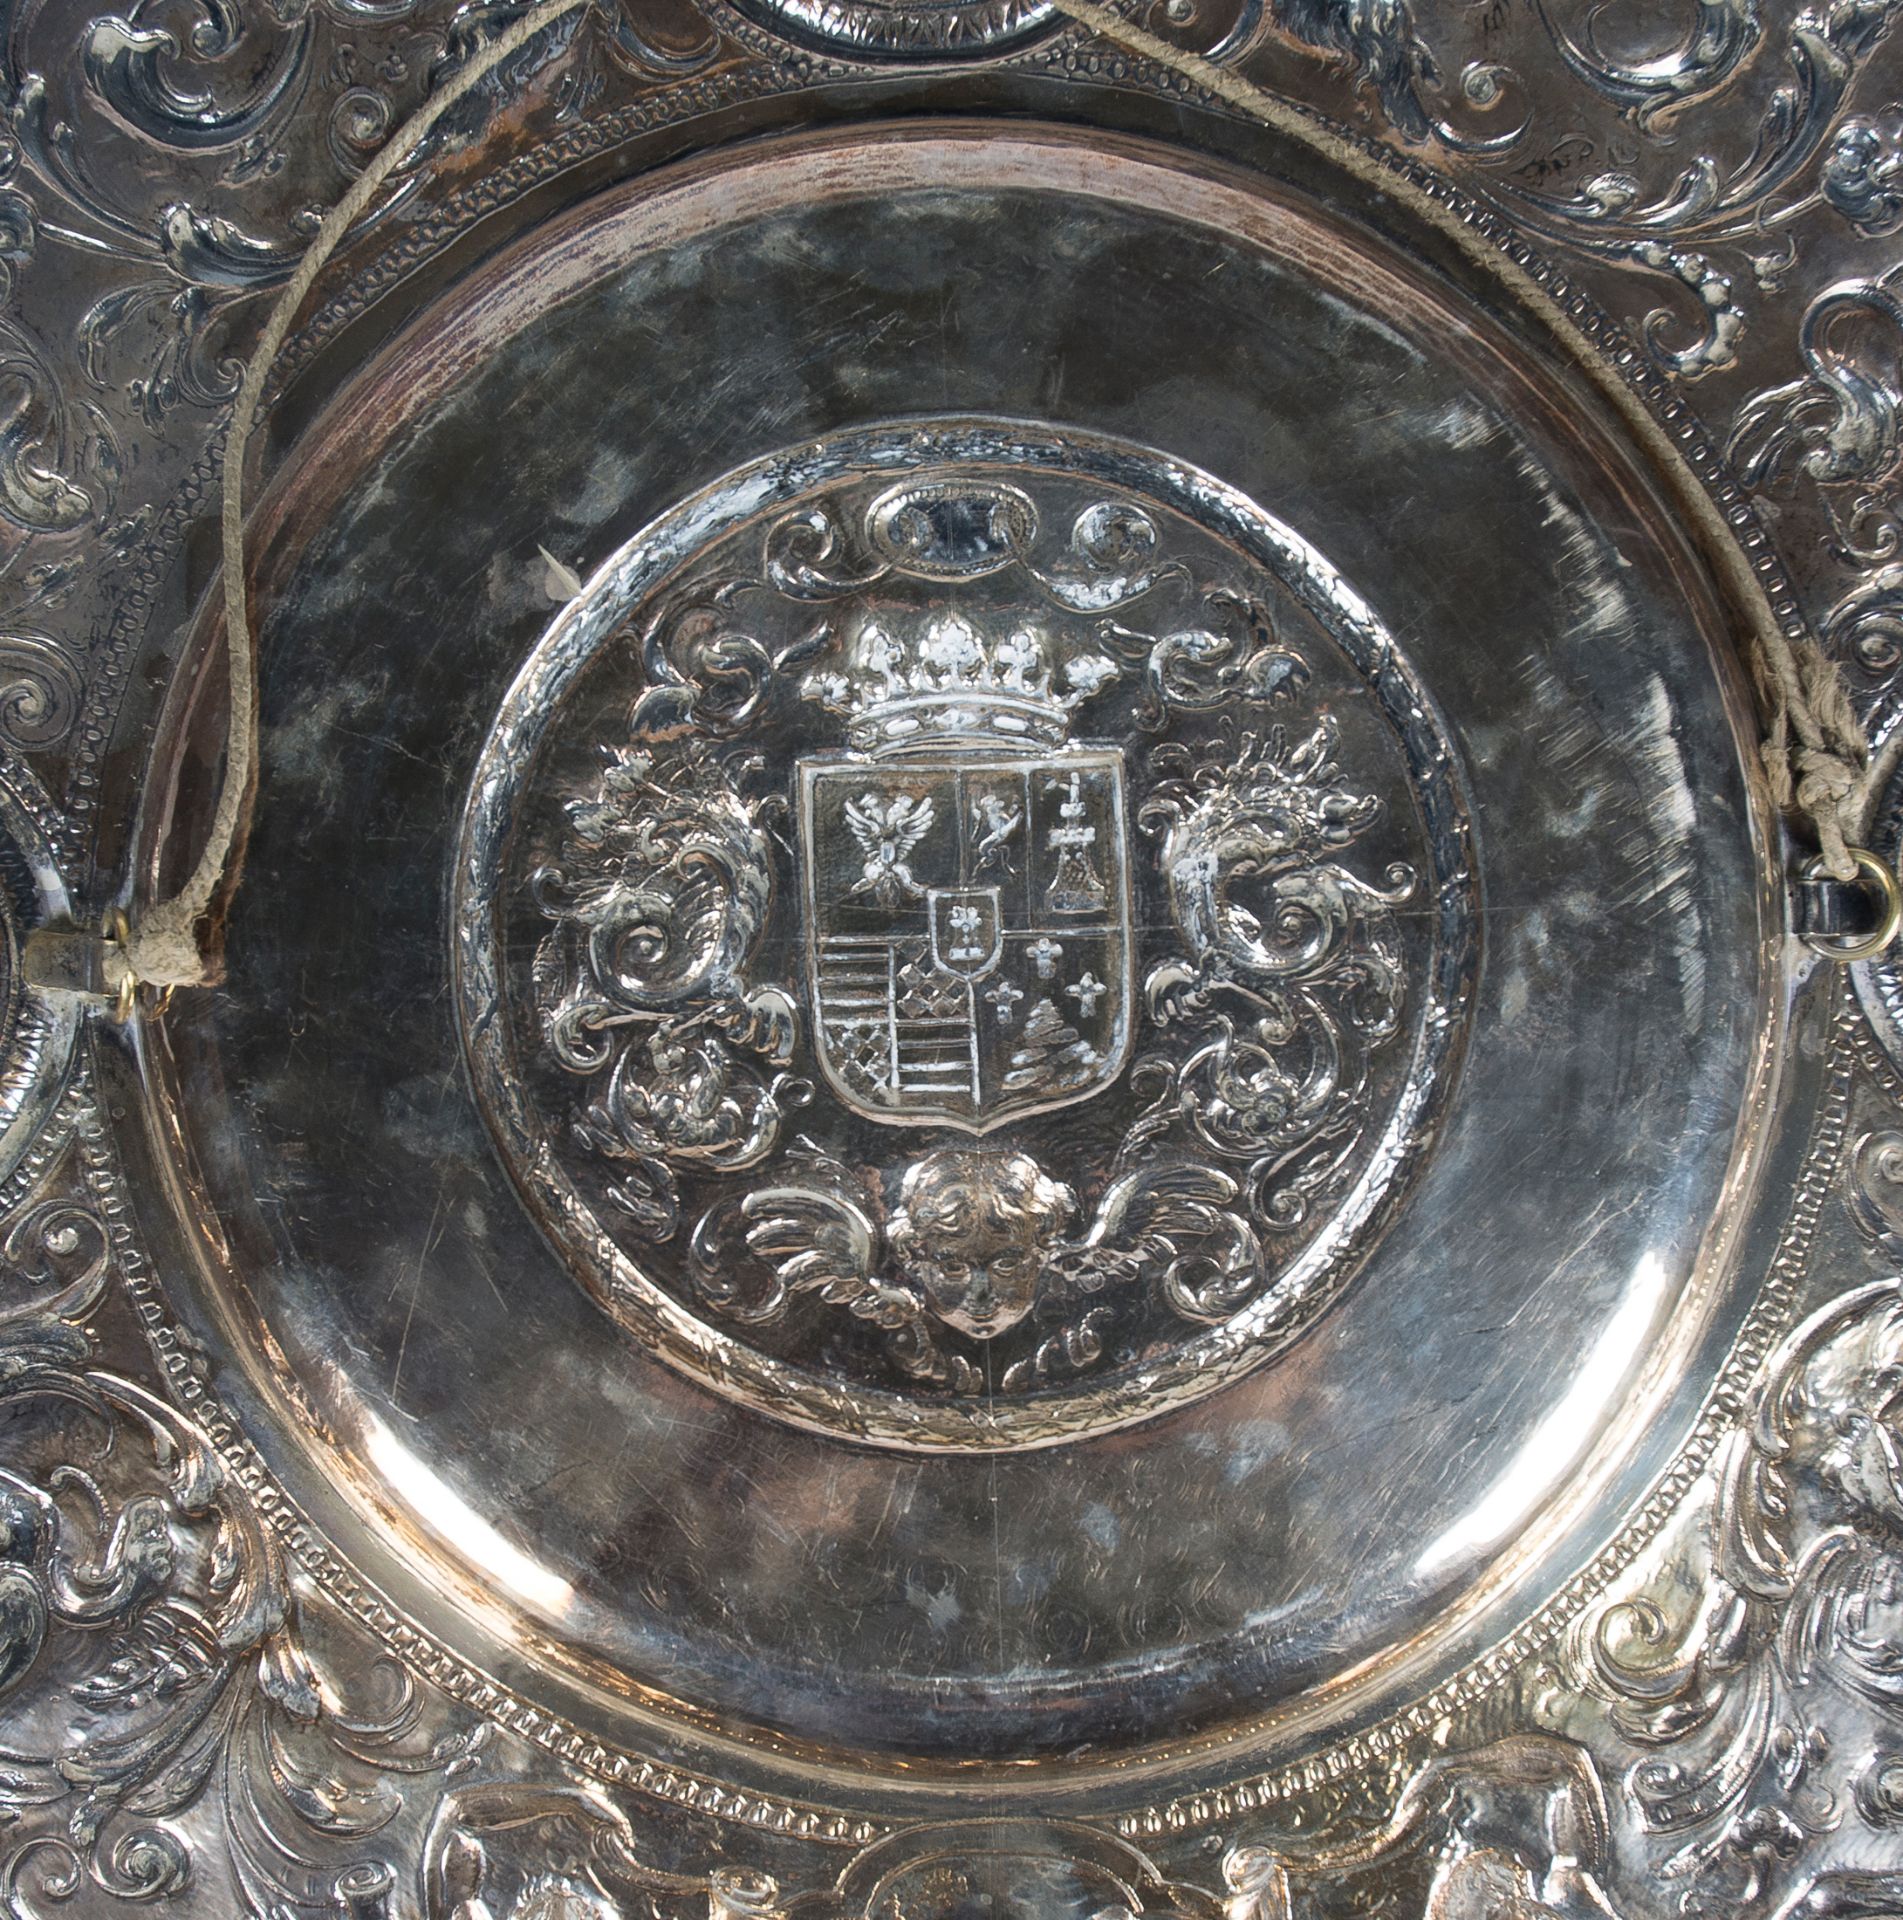 Large, embossed and chased silver plate. 19th century. - Image 5 of 7